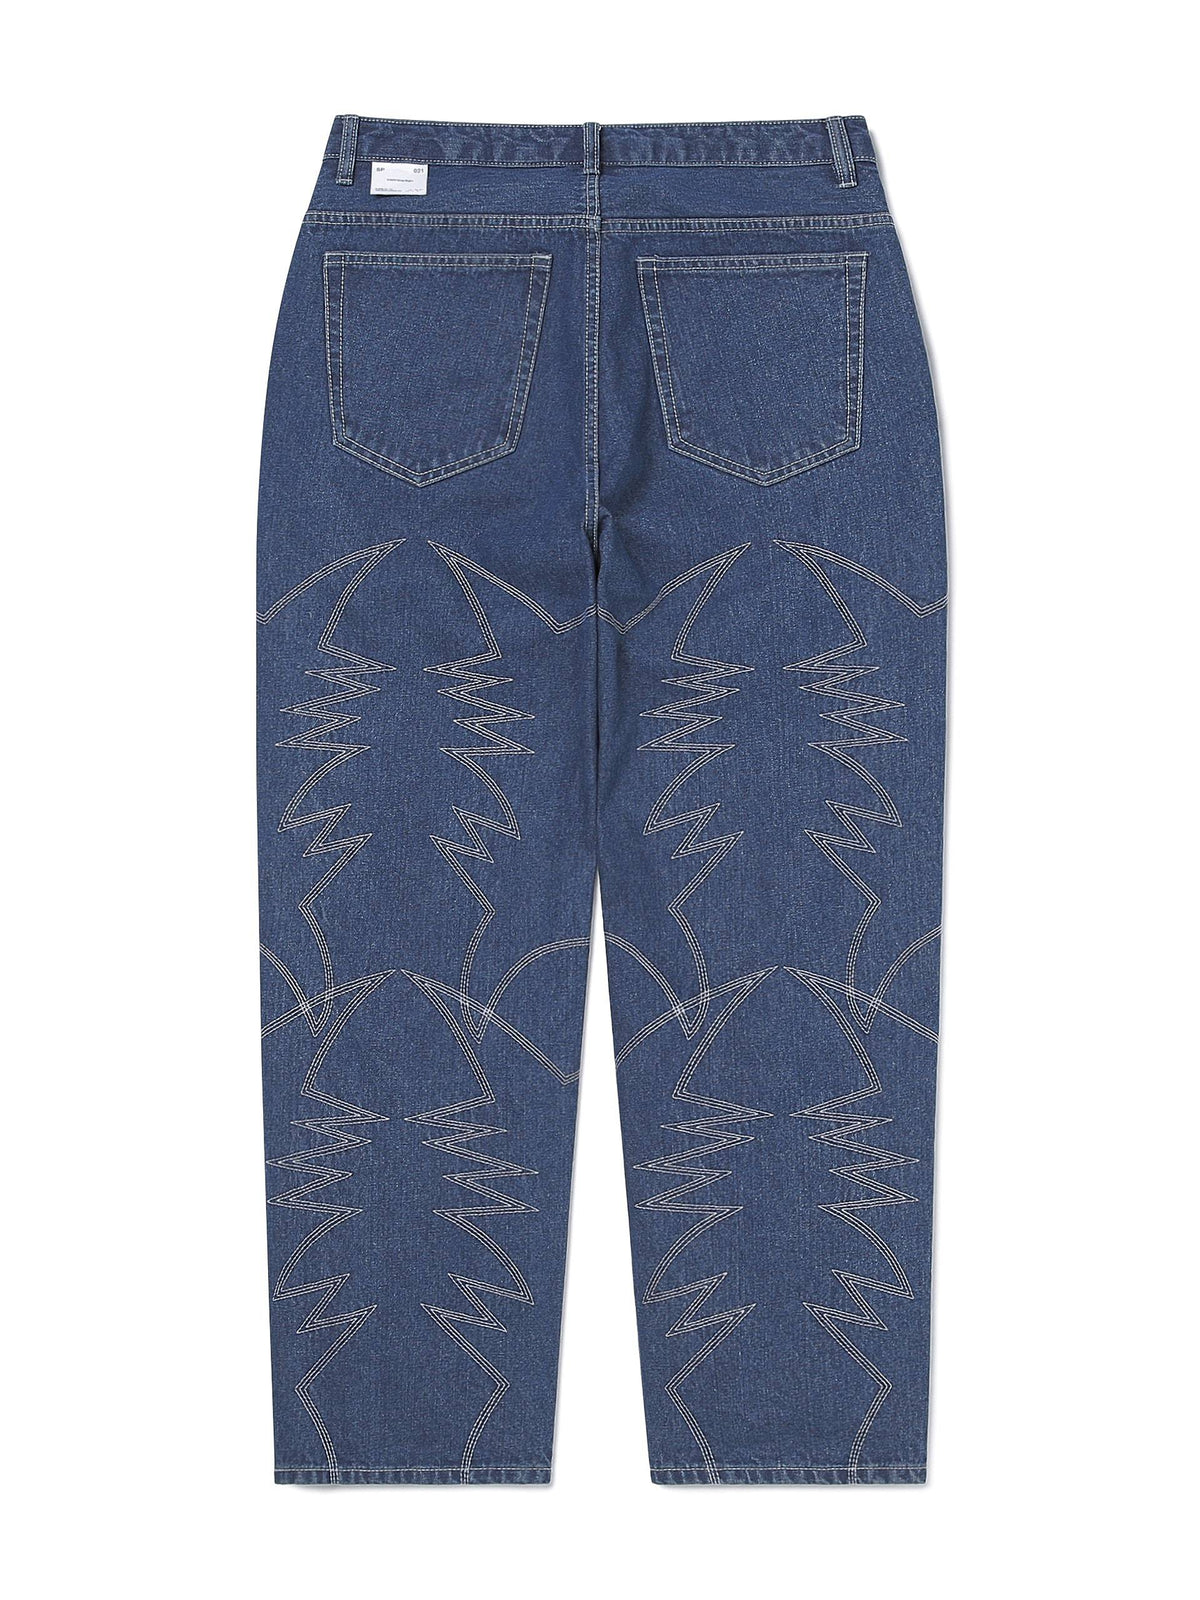 Embroidery Jean Pants 